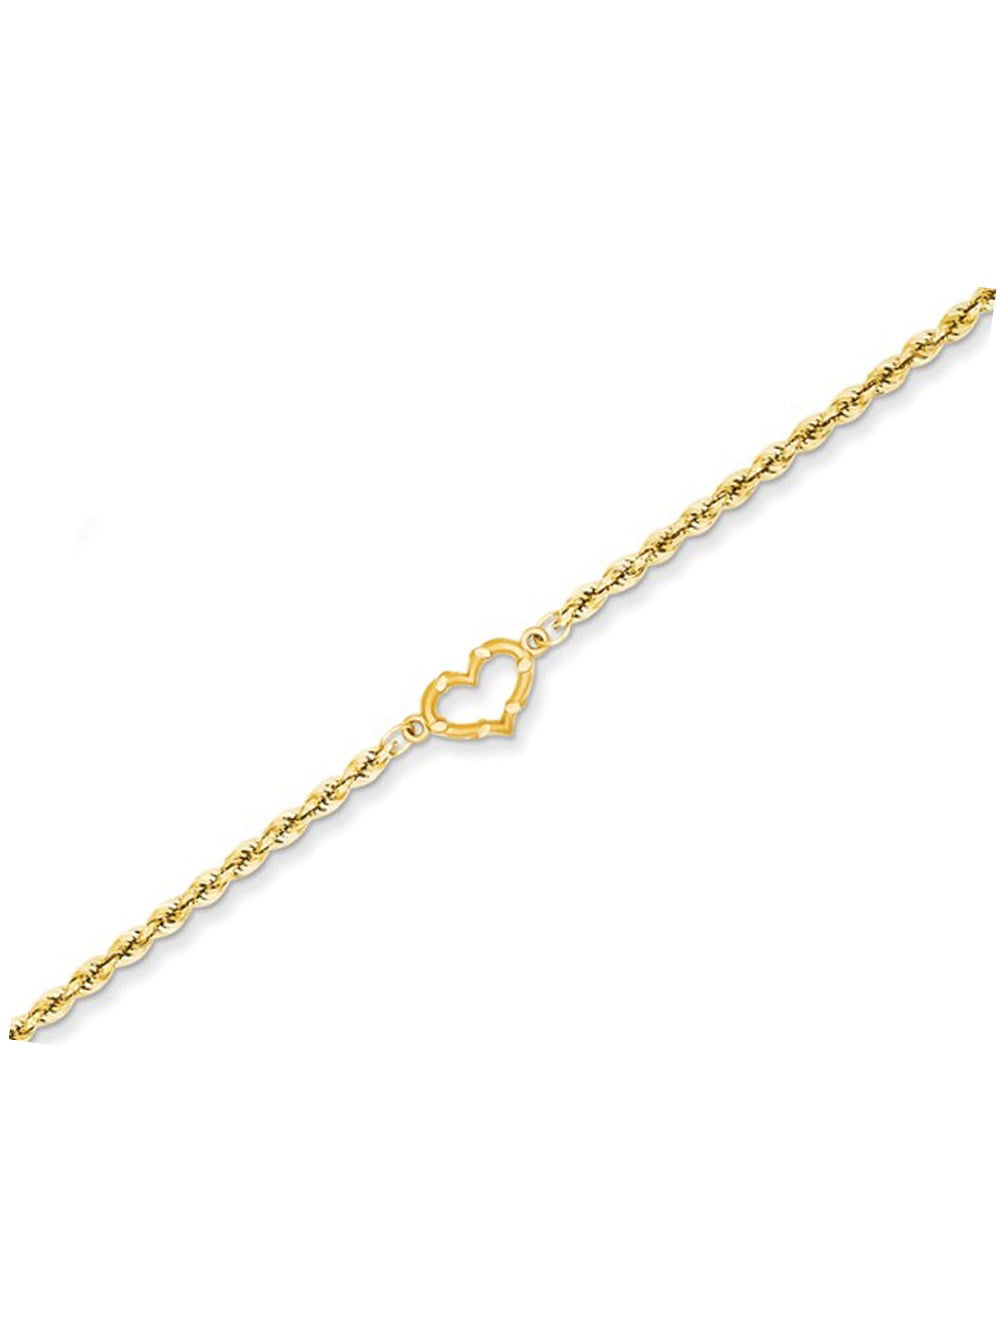 Diamond Cut Rope Chain Anklet with Heart in 14K Yellow Gold 10 Inches